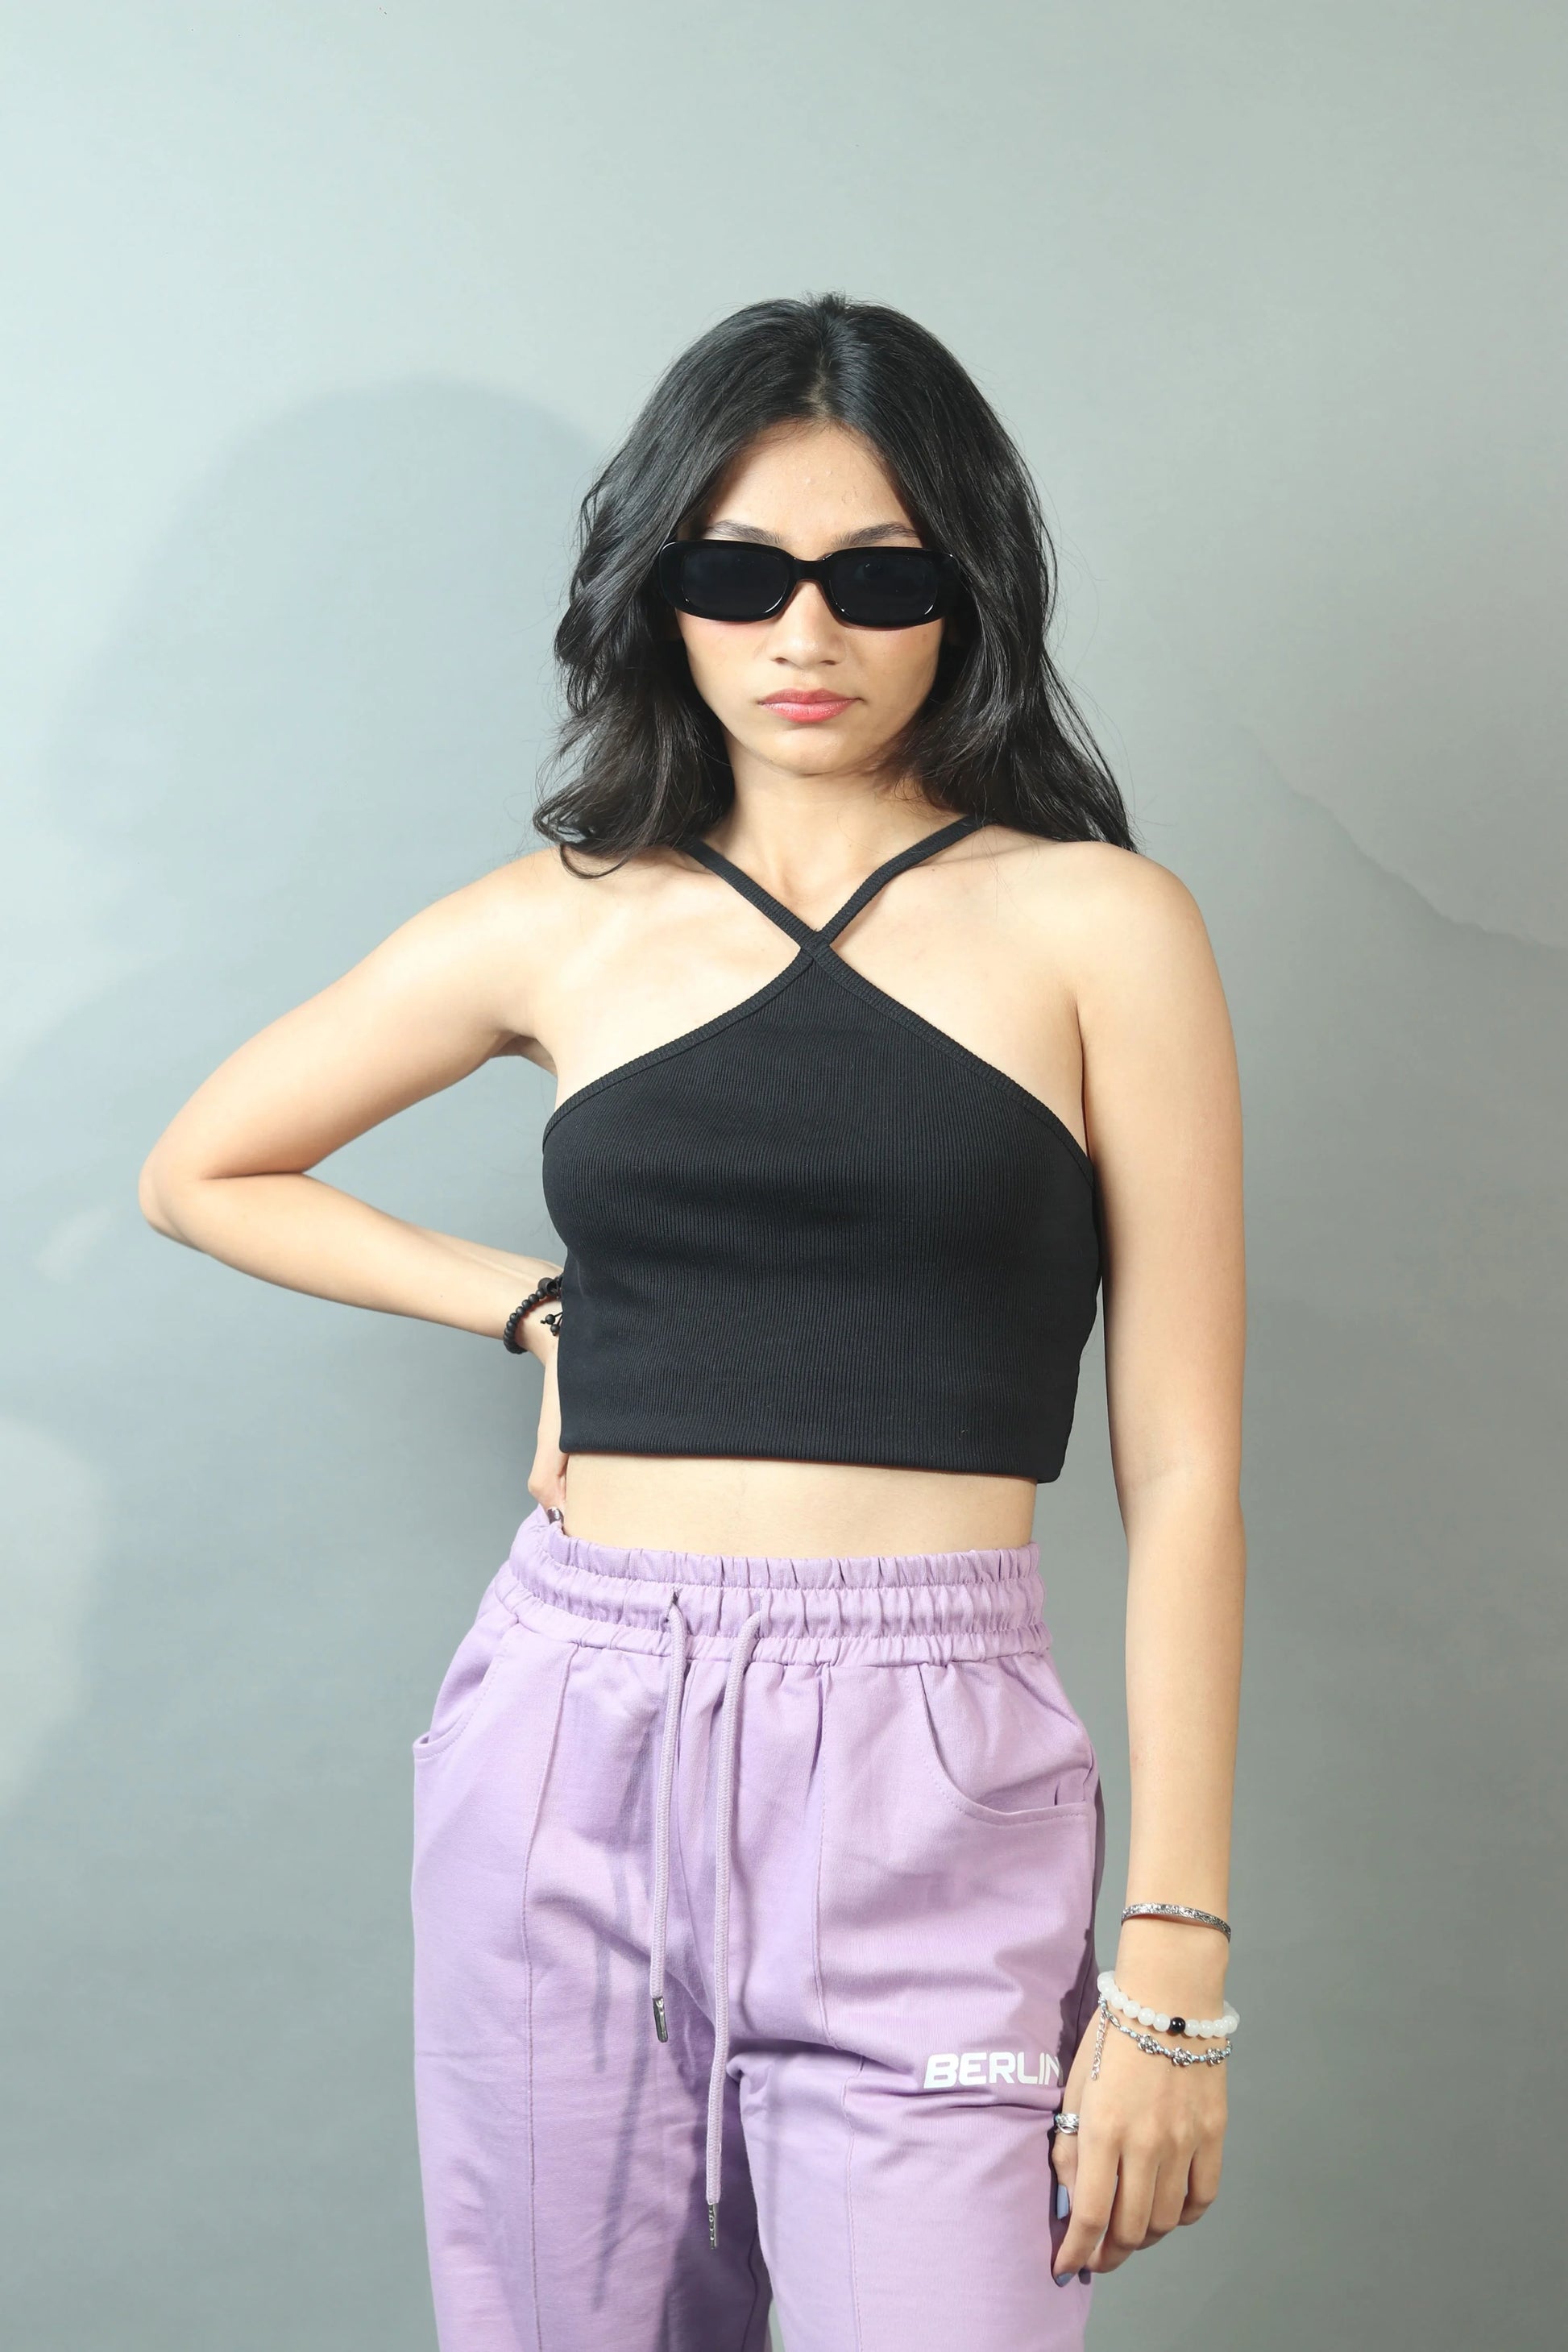 Infuse streetwear vibes into your look with this women's black crop tank top, a stylish and urban addition to your wardrobe.